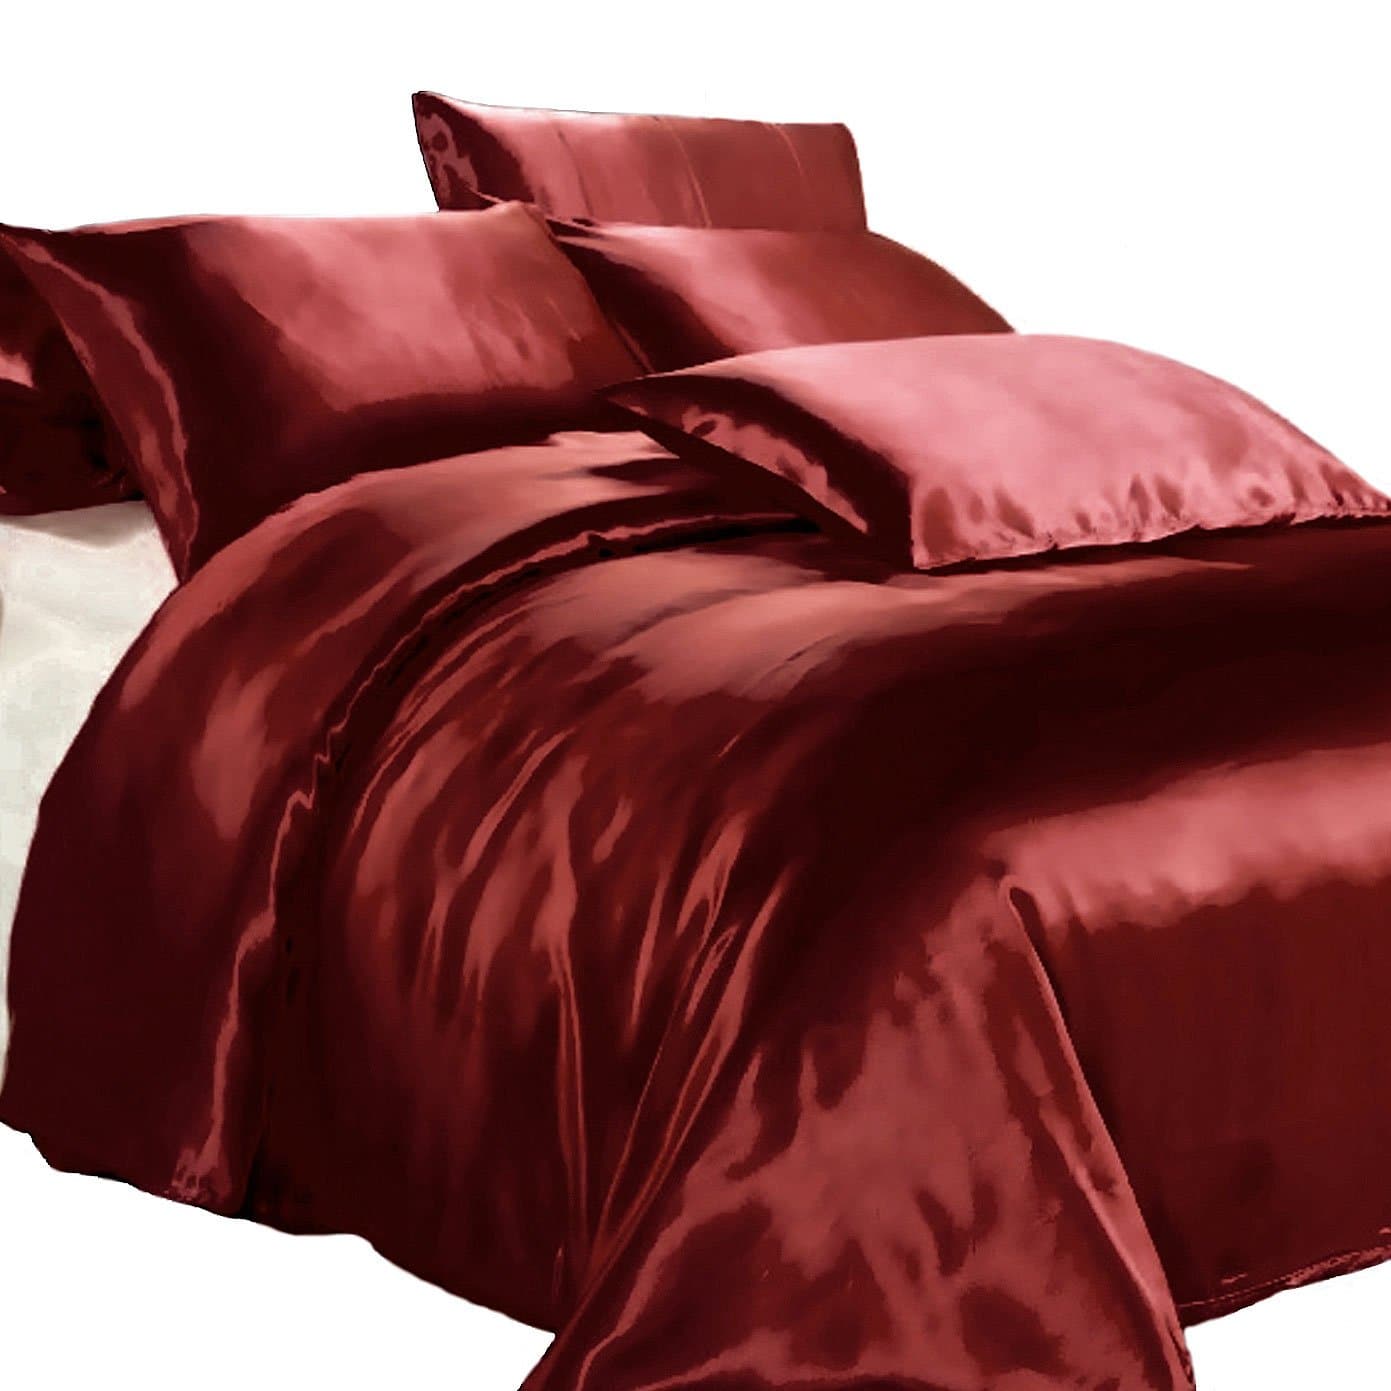 Satin Quilt Cover - Wine Red